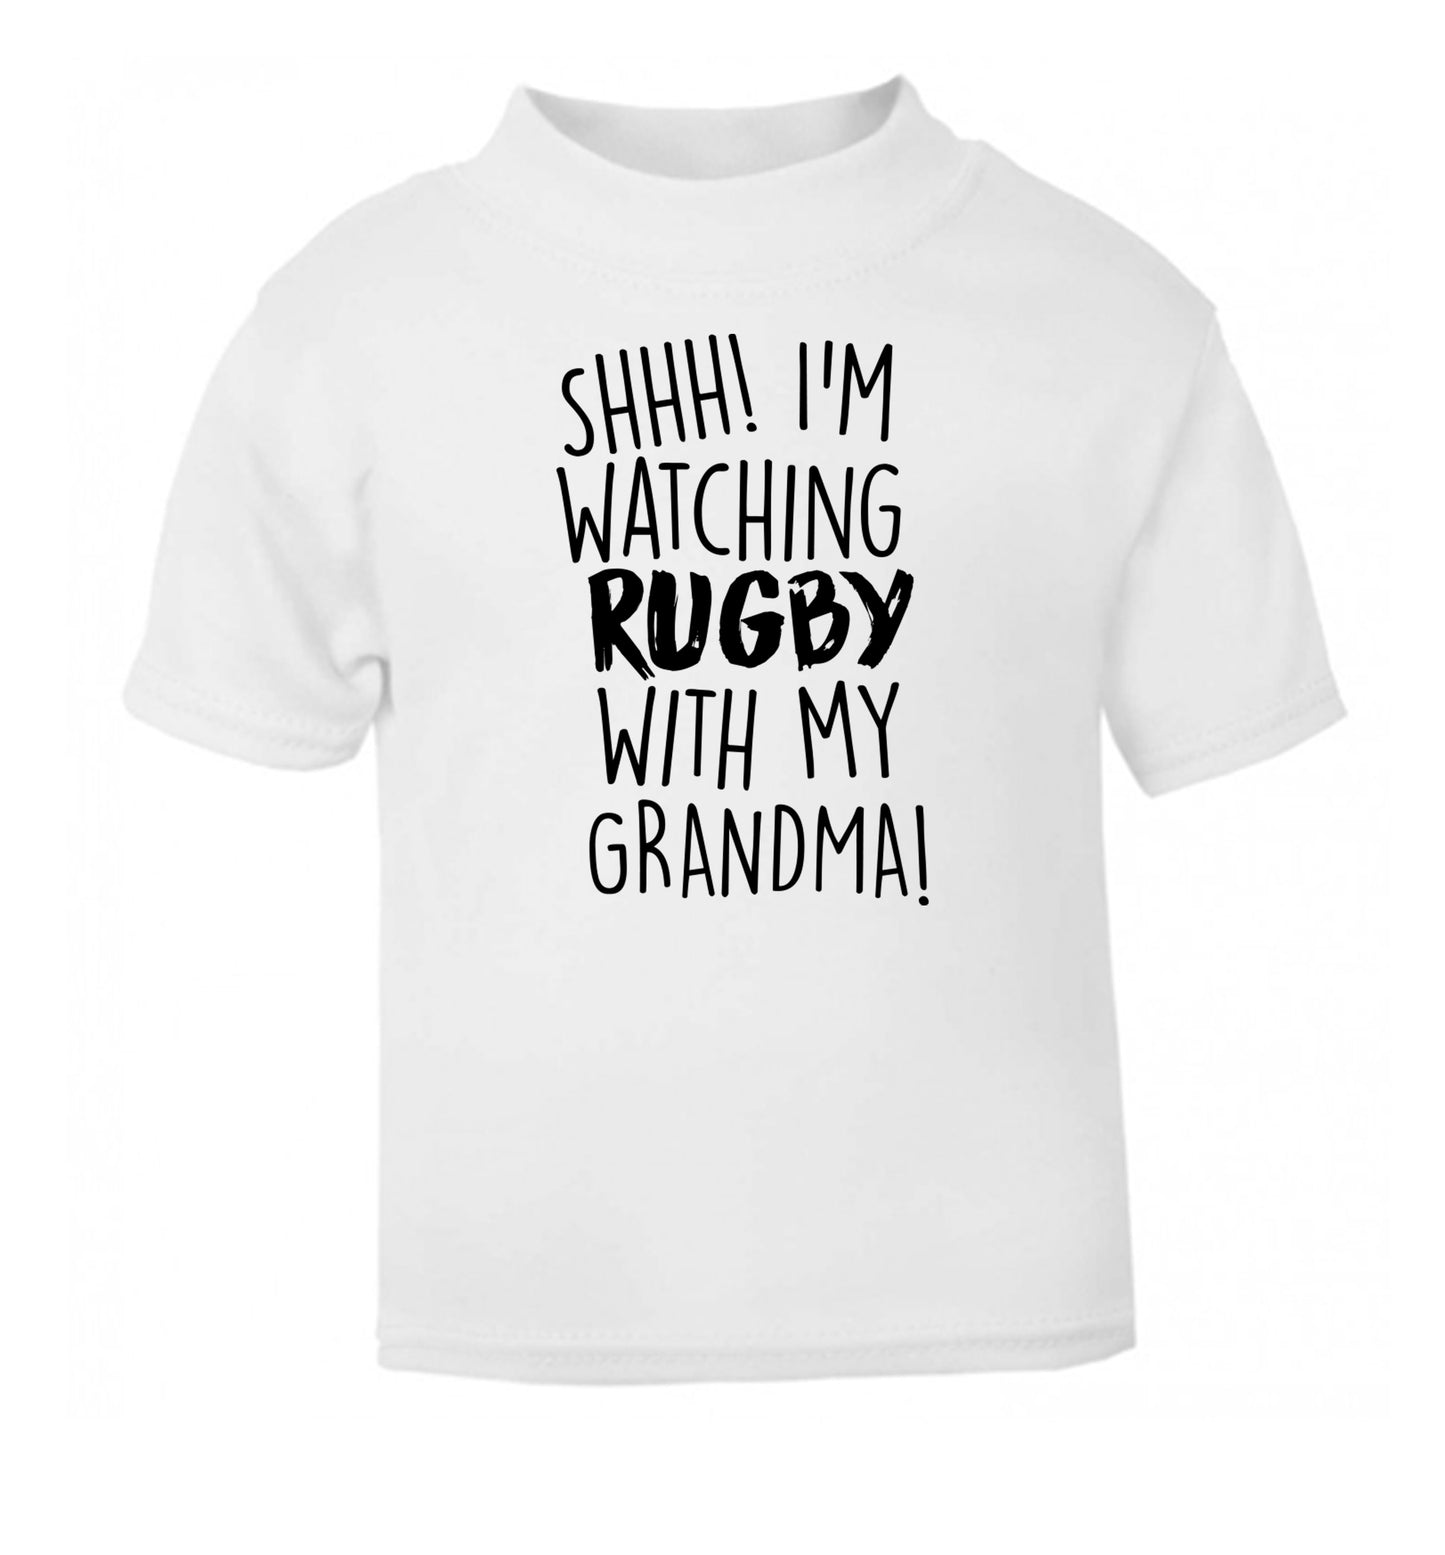 Shh I'm watching rugby with my grandma white Baby Toddler Tshirt 2 Years